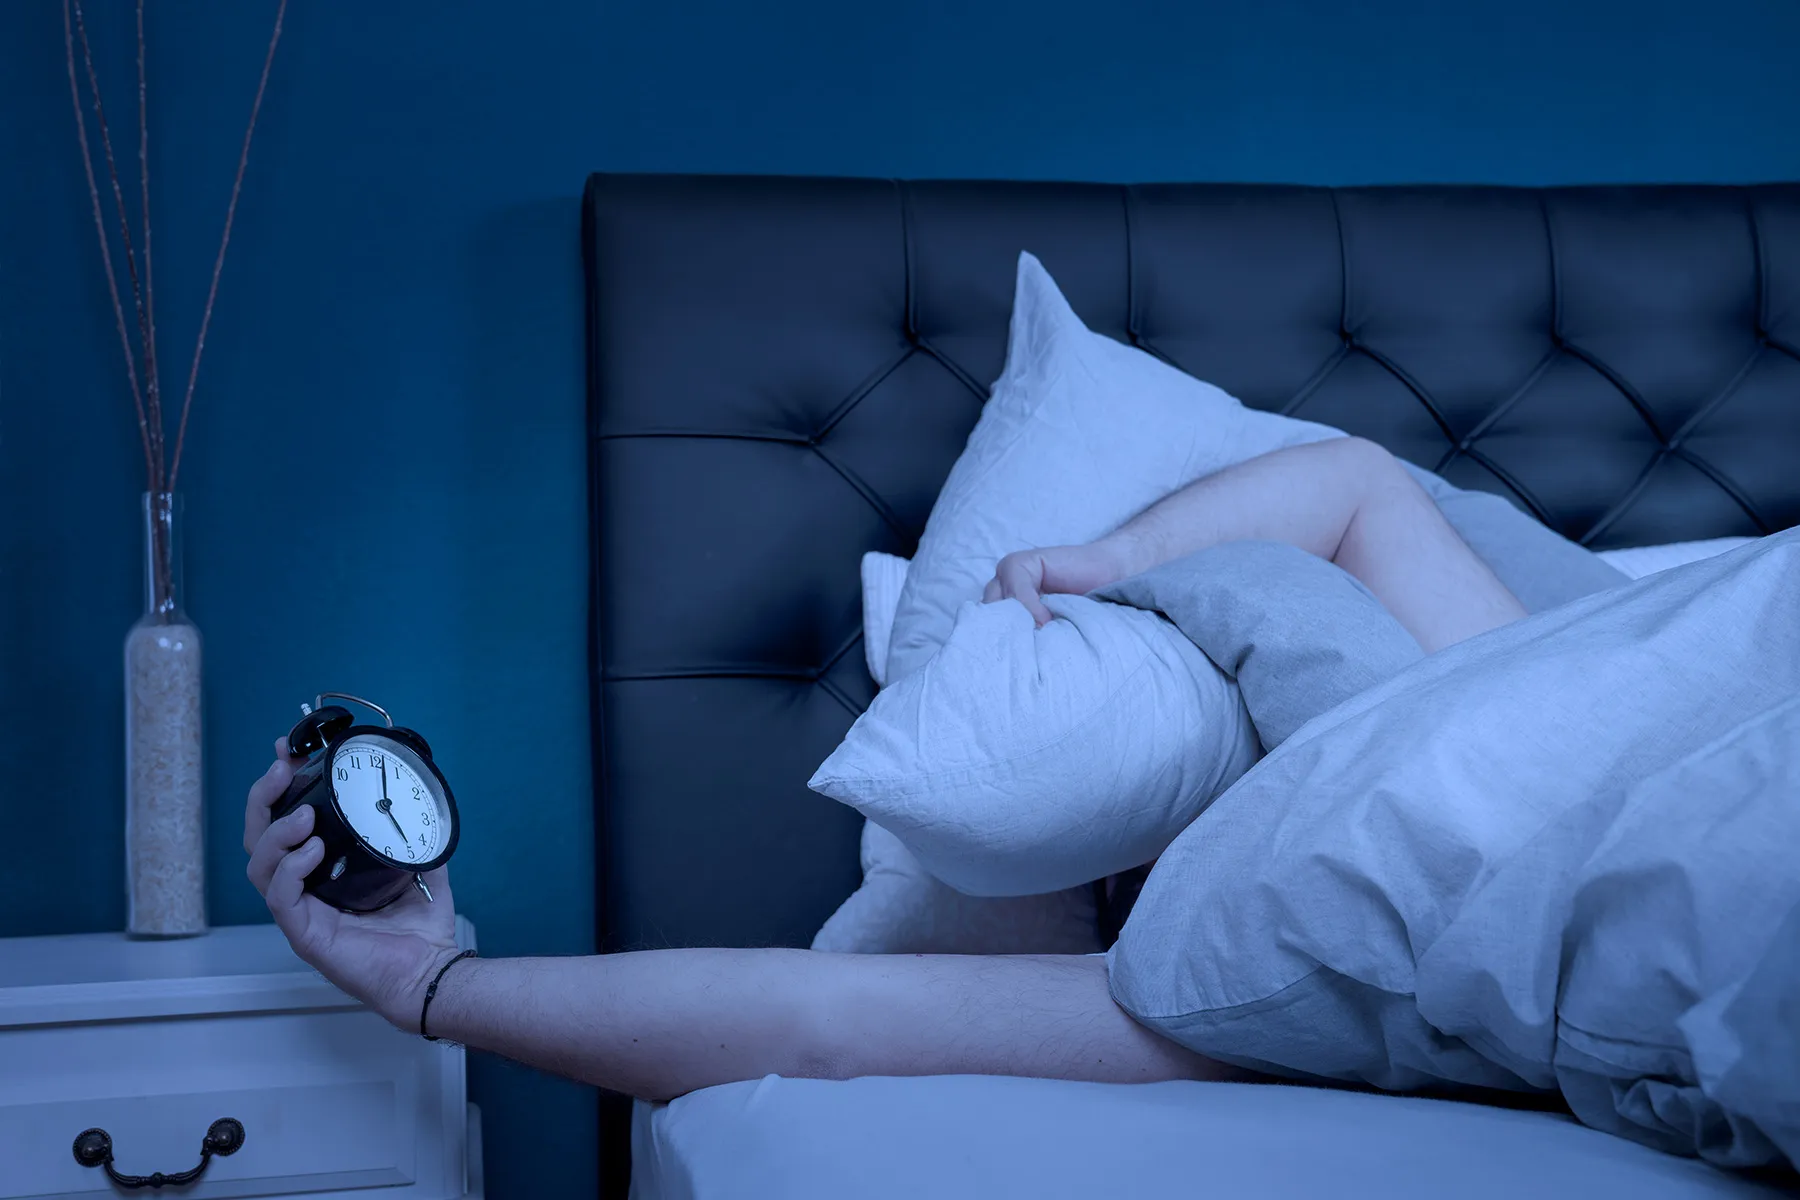 Stabilizing Circadian Rhythm Tied to Lower Suicide Risk in Bipolar Disorder